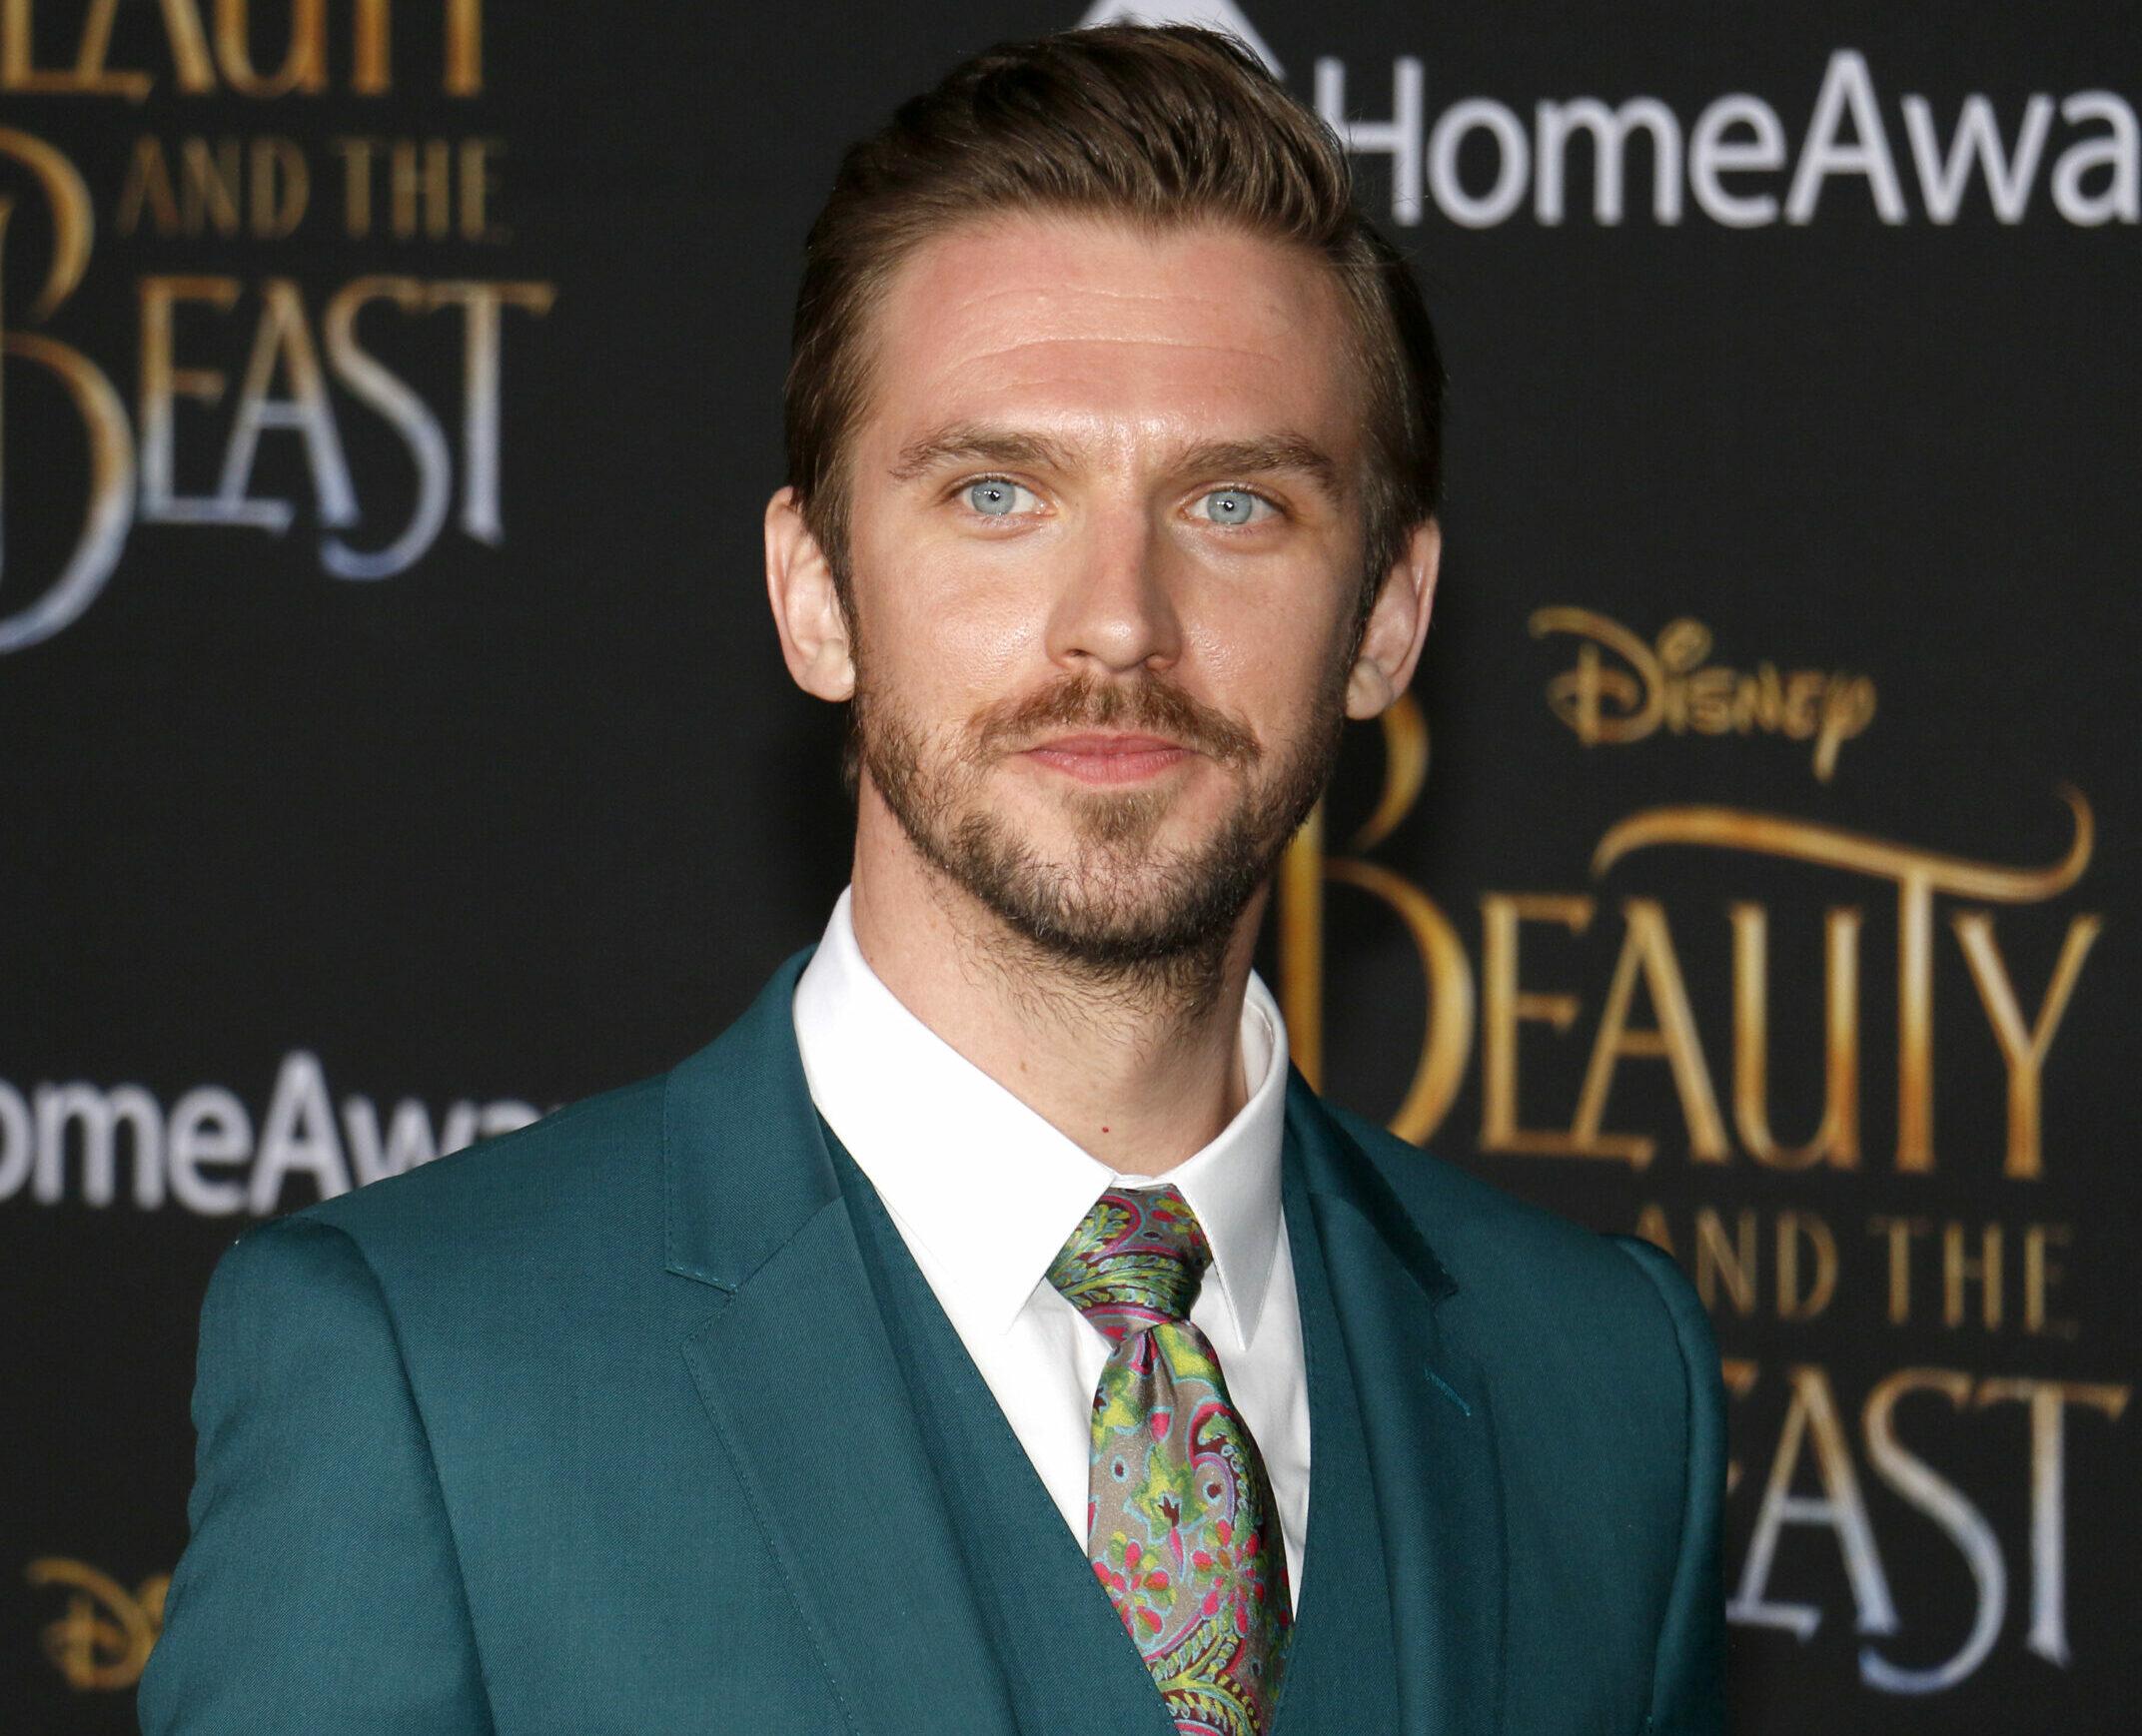 Los Angeles premiere of 'Beauty And The Beast' held at the El Capitan Theatre in Hollywood. 02 Mar 2017 Pictured: Dan Stevens.